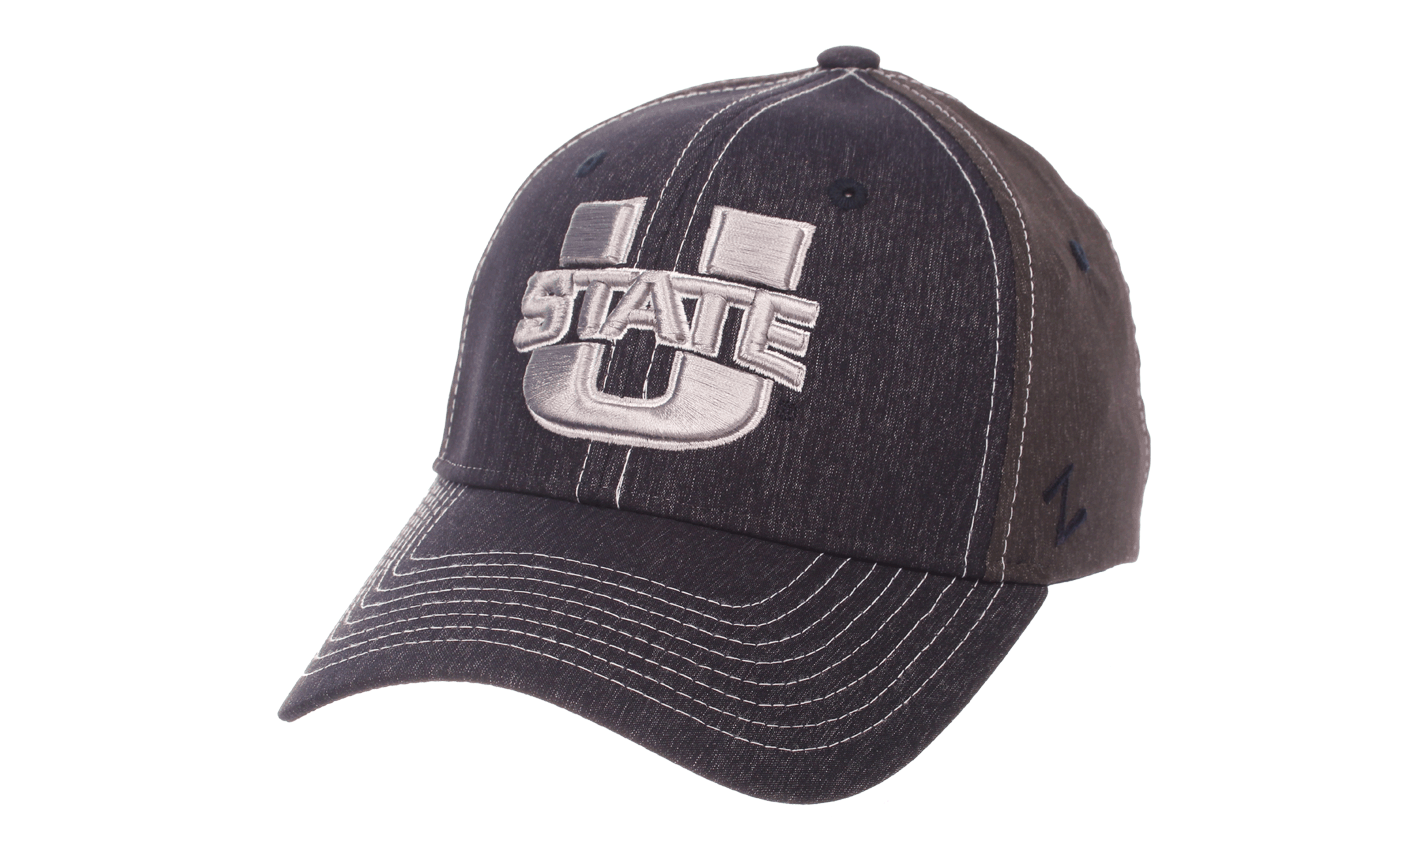 Aggies Dusk Youth Hat